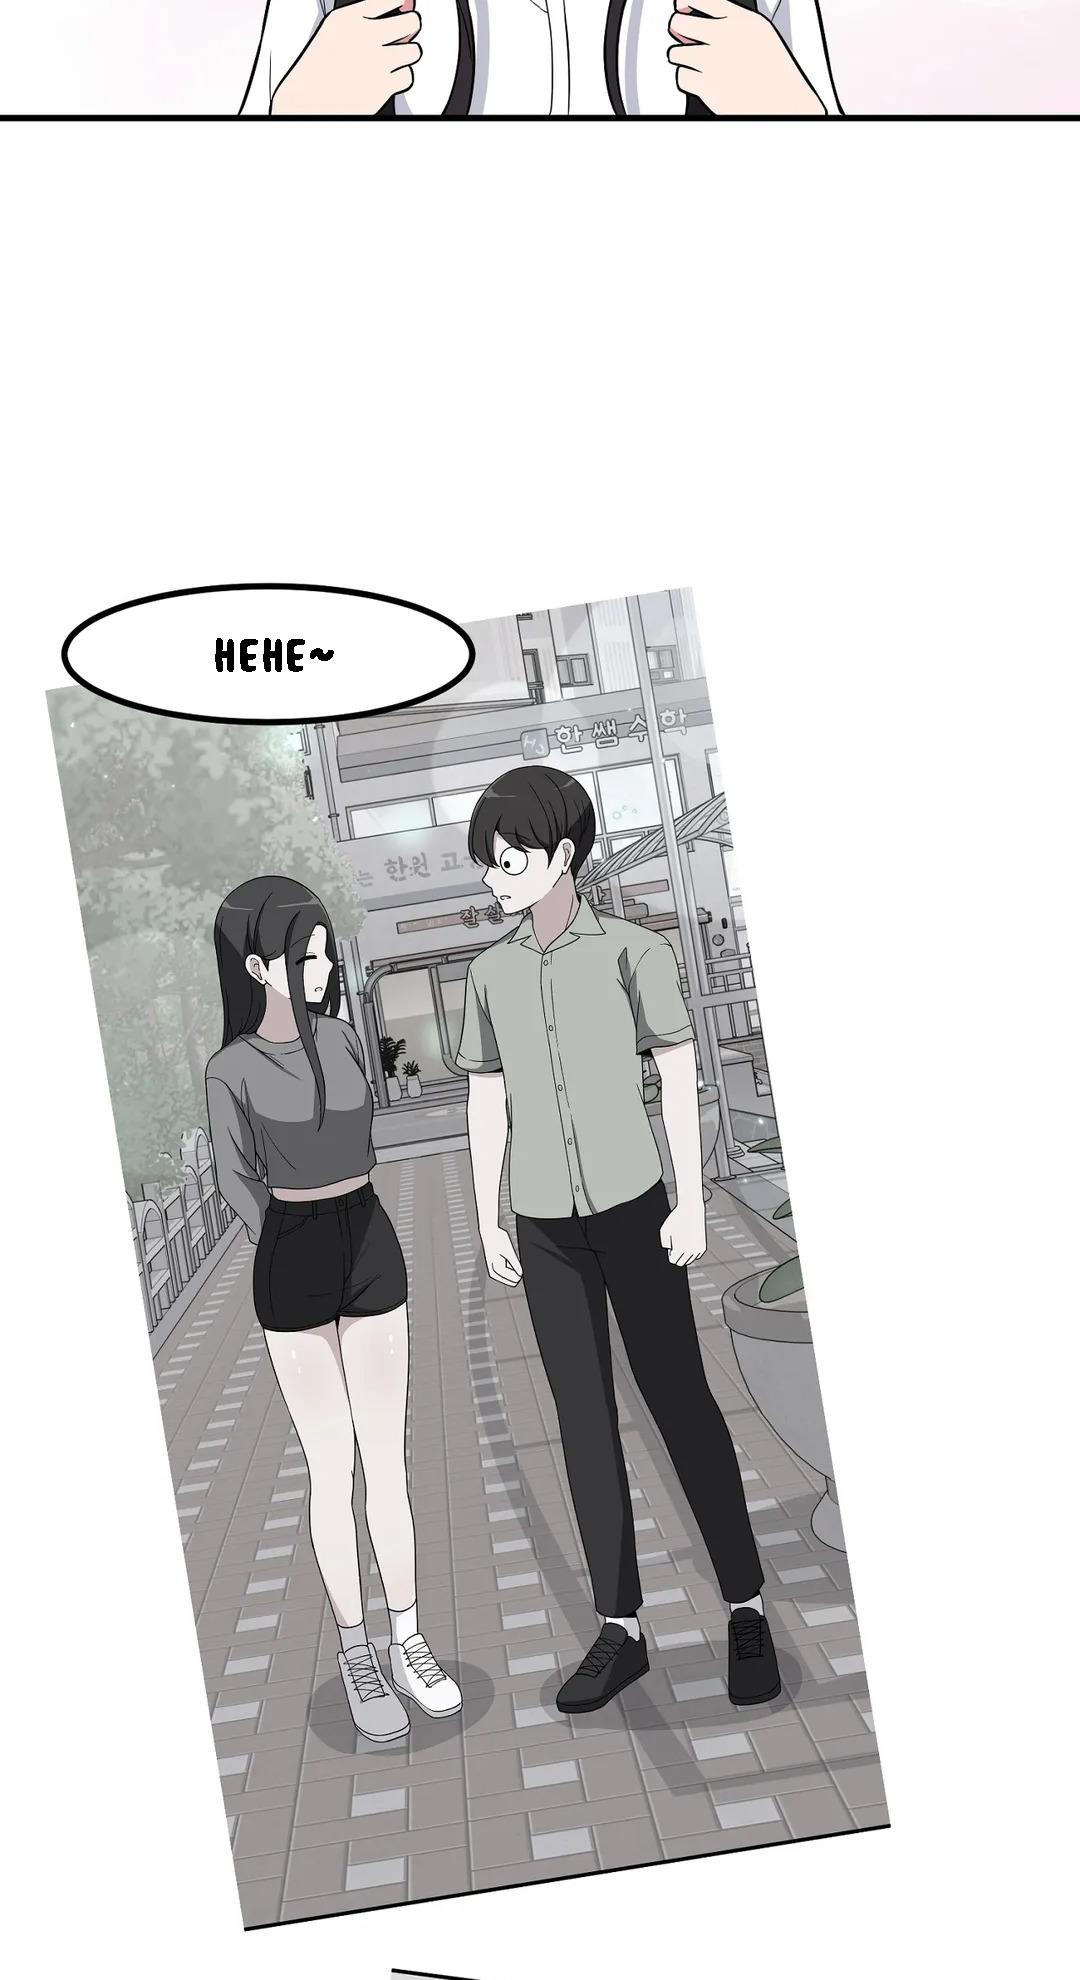 The Secret Of The Partner Next To You Vol.2 Chapter 47: Part 2 Begins - Picture 3